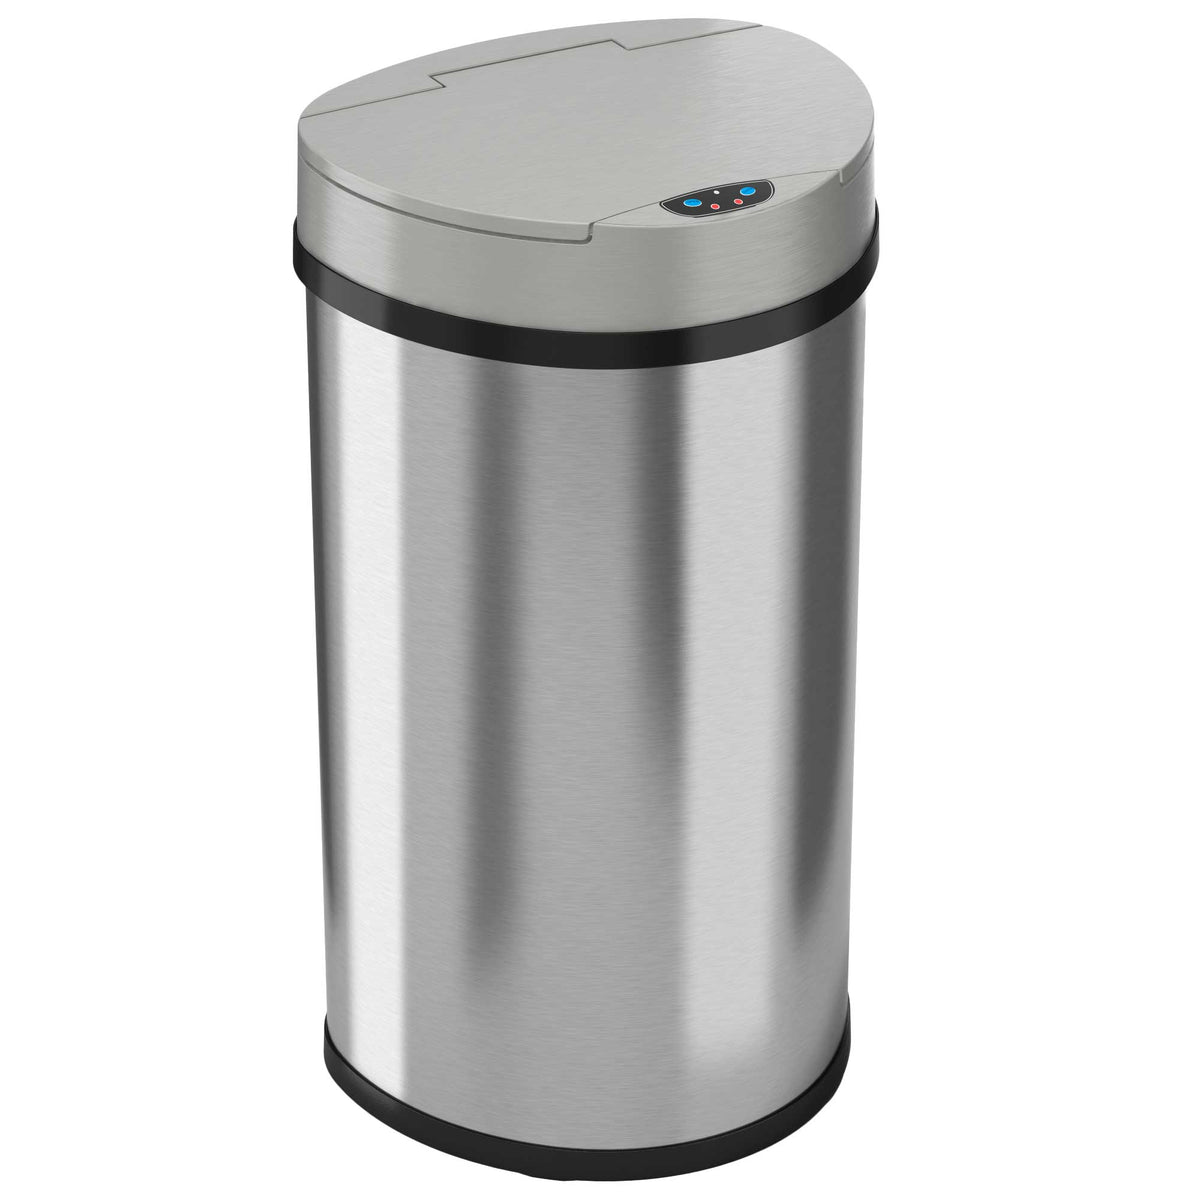 13 Gallon Semi-Round Stainless Steel Sensor Trash Can with Odor Filter